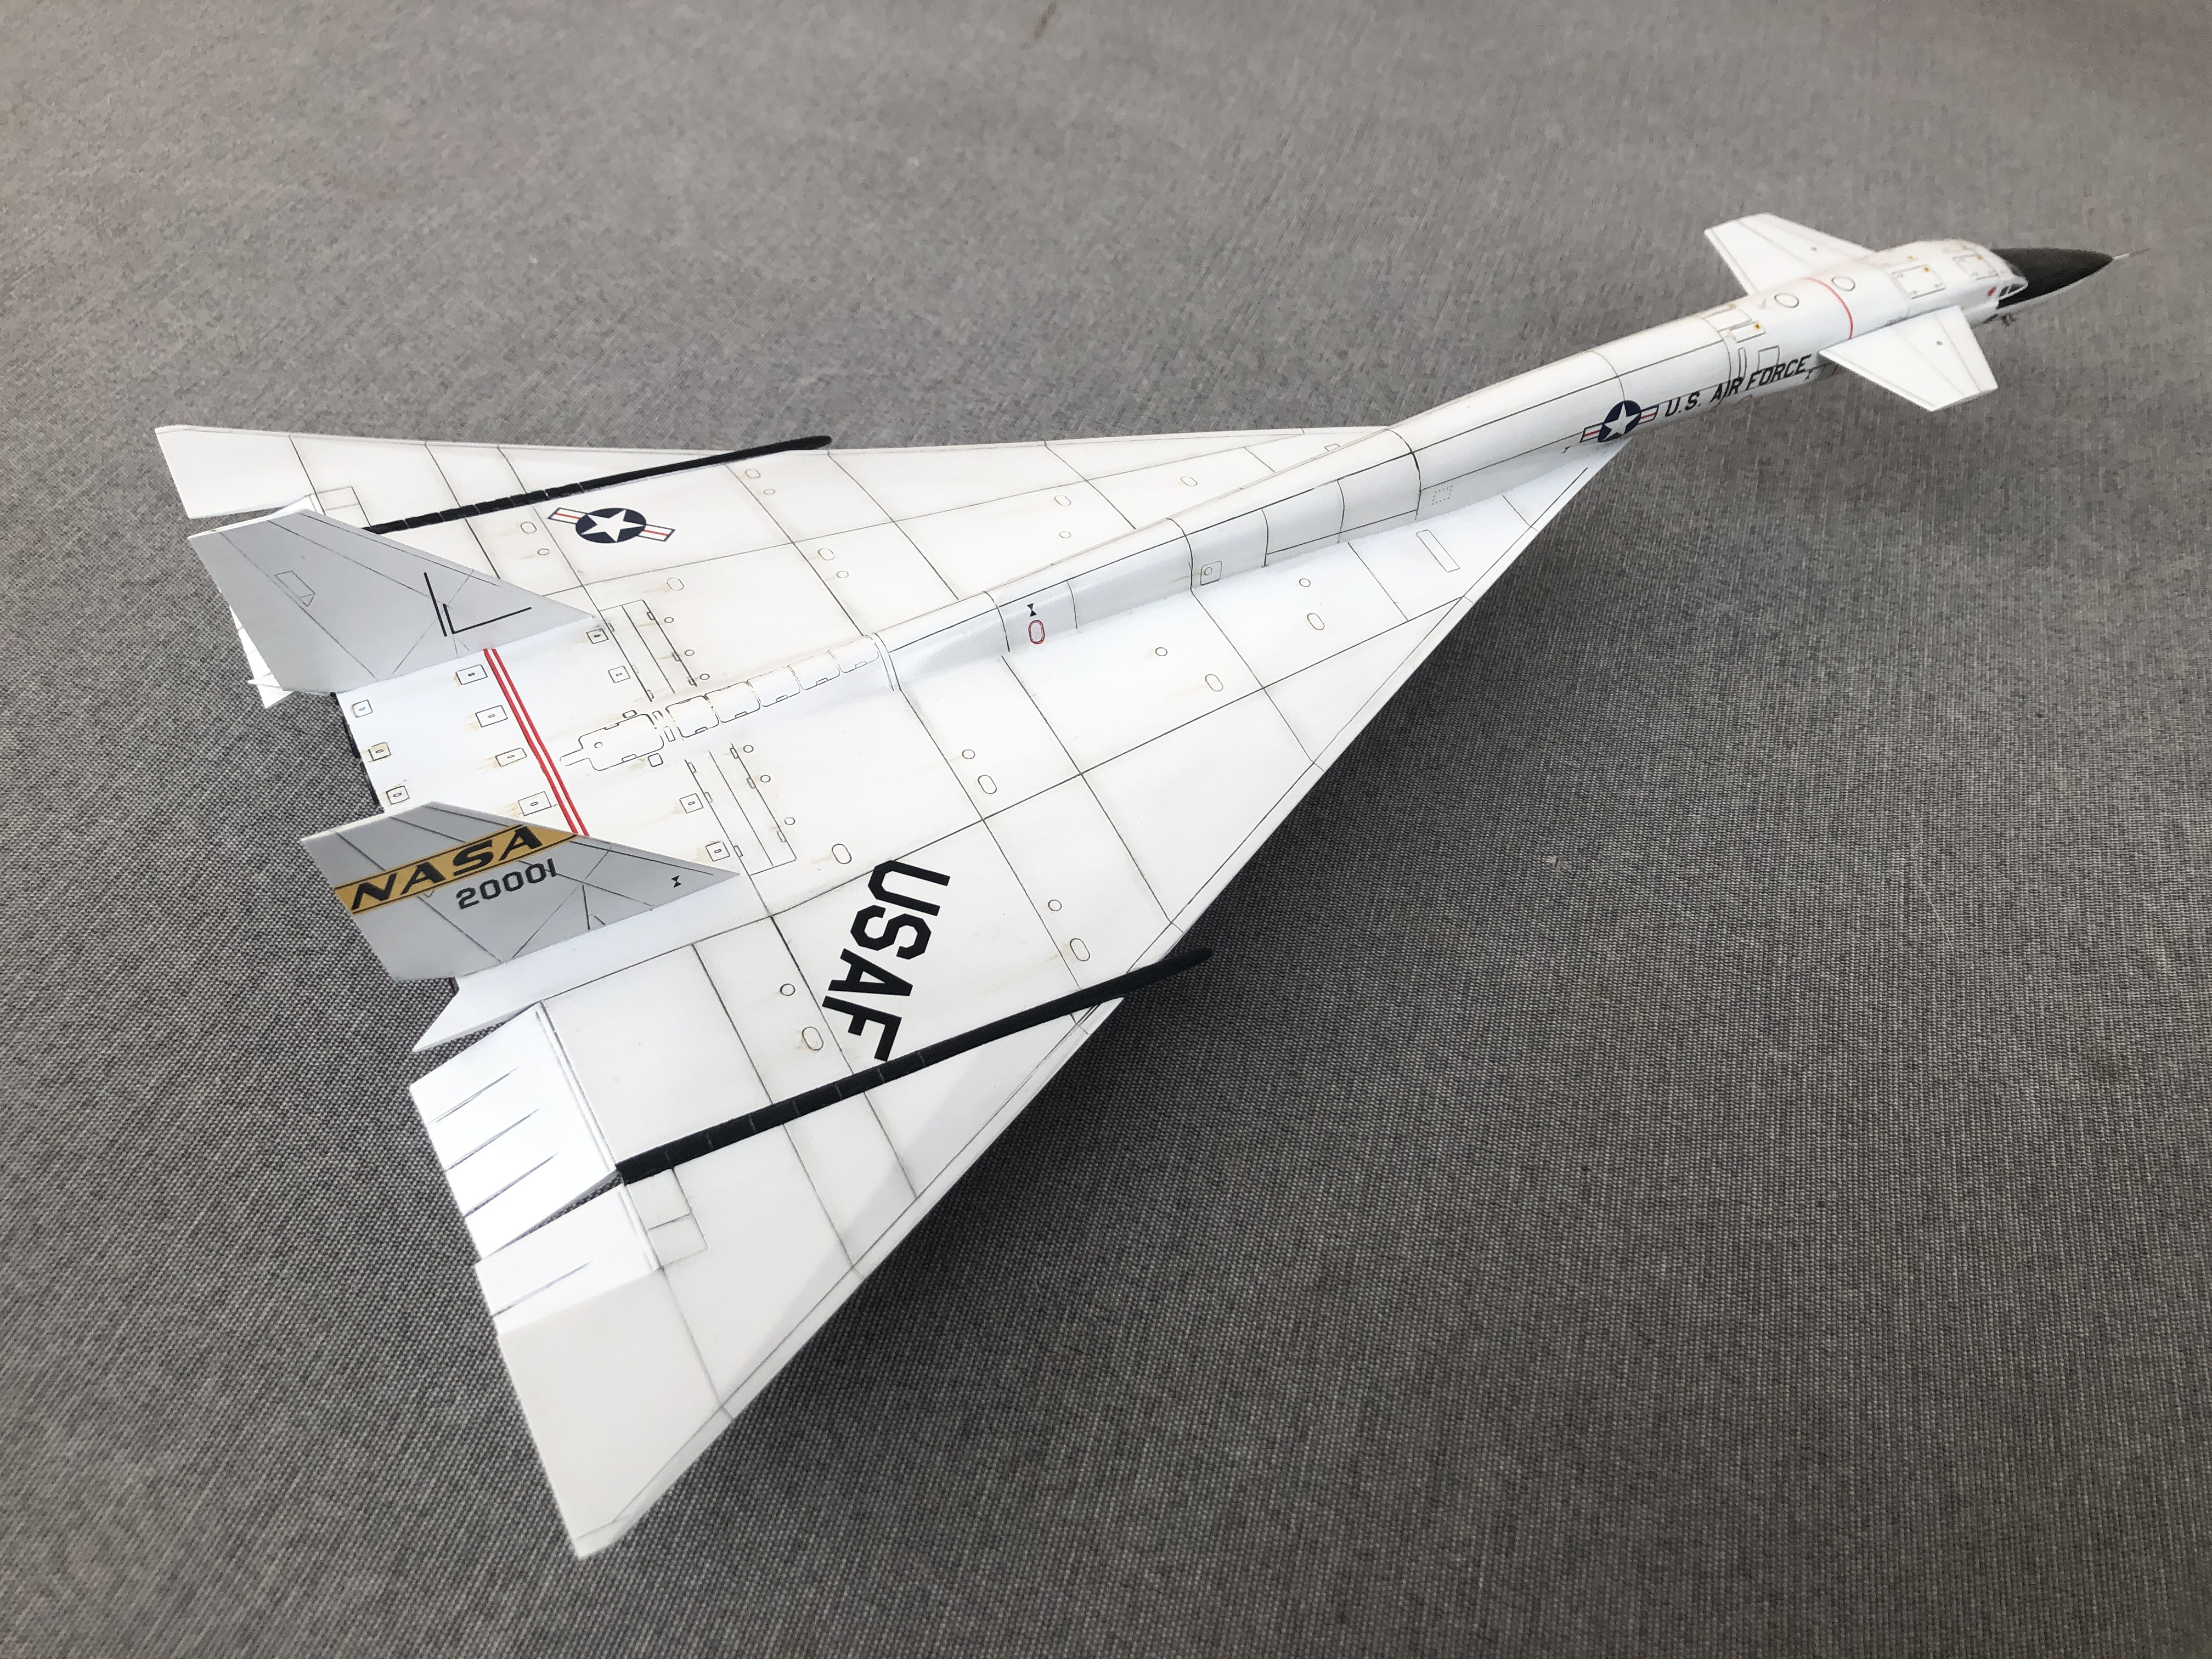 [ARMORY] North American XB-70 Valkyrie  1/144 Frs9